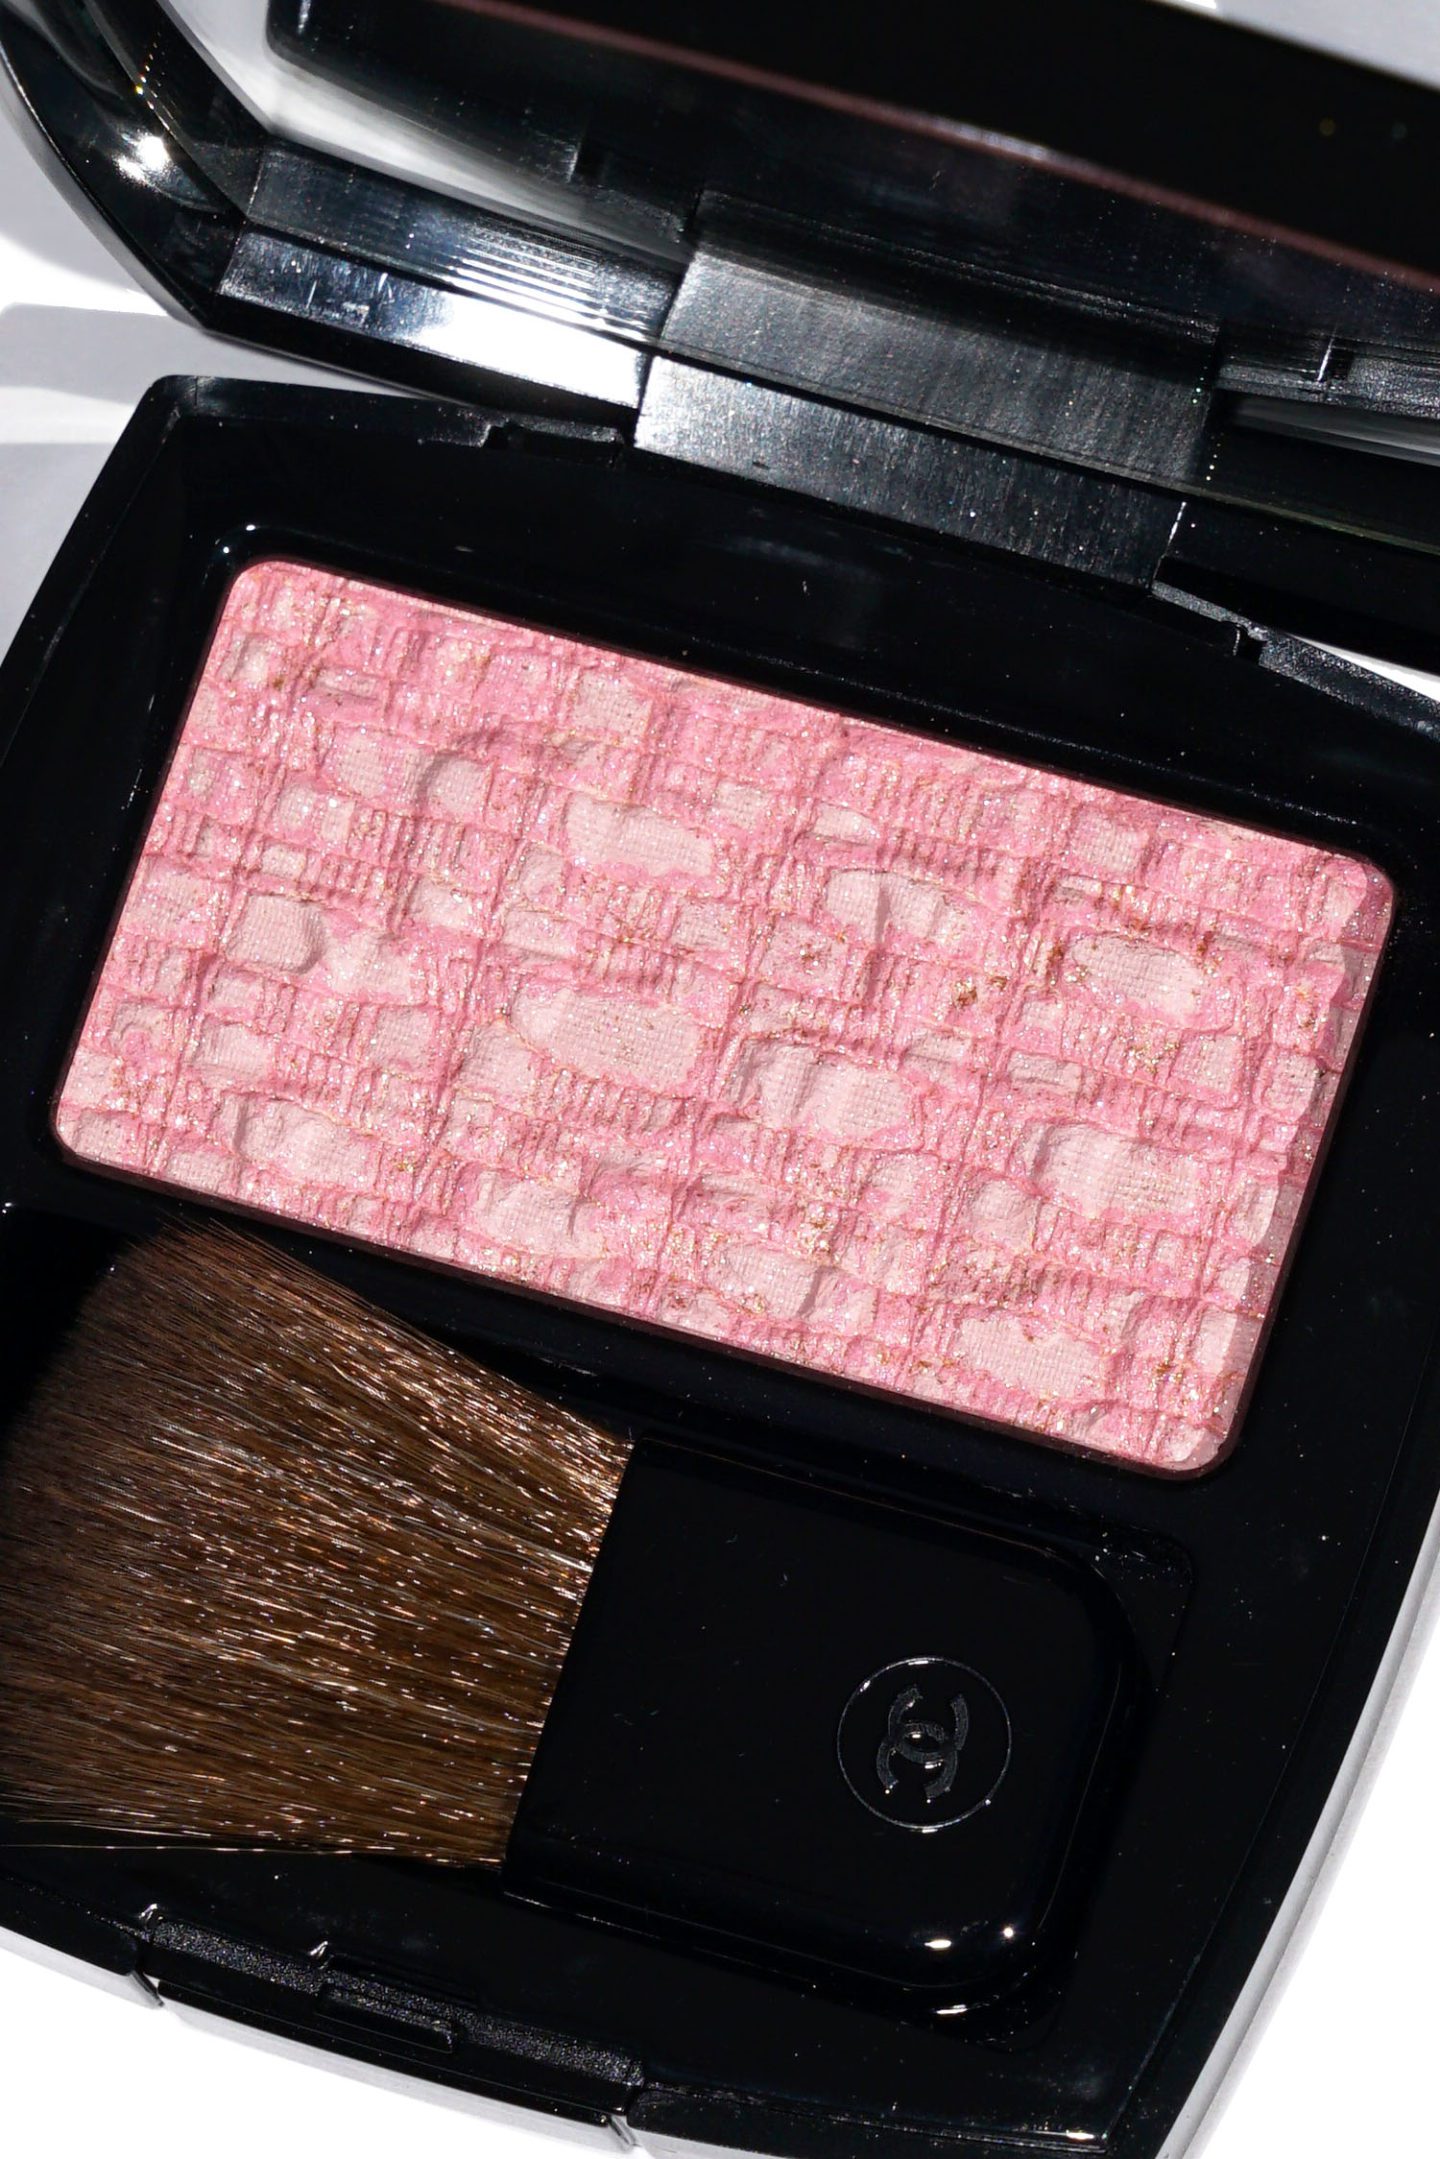 Chanel Les Tissages de Chanel Tweed Pink Blush review and swatches